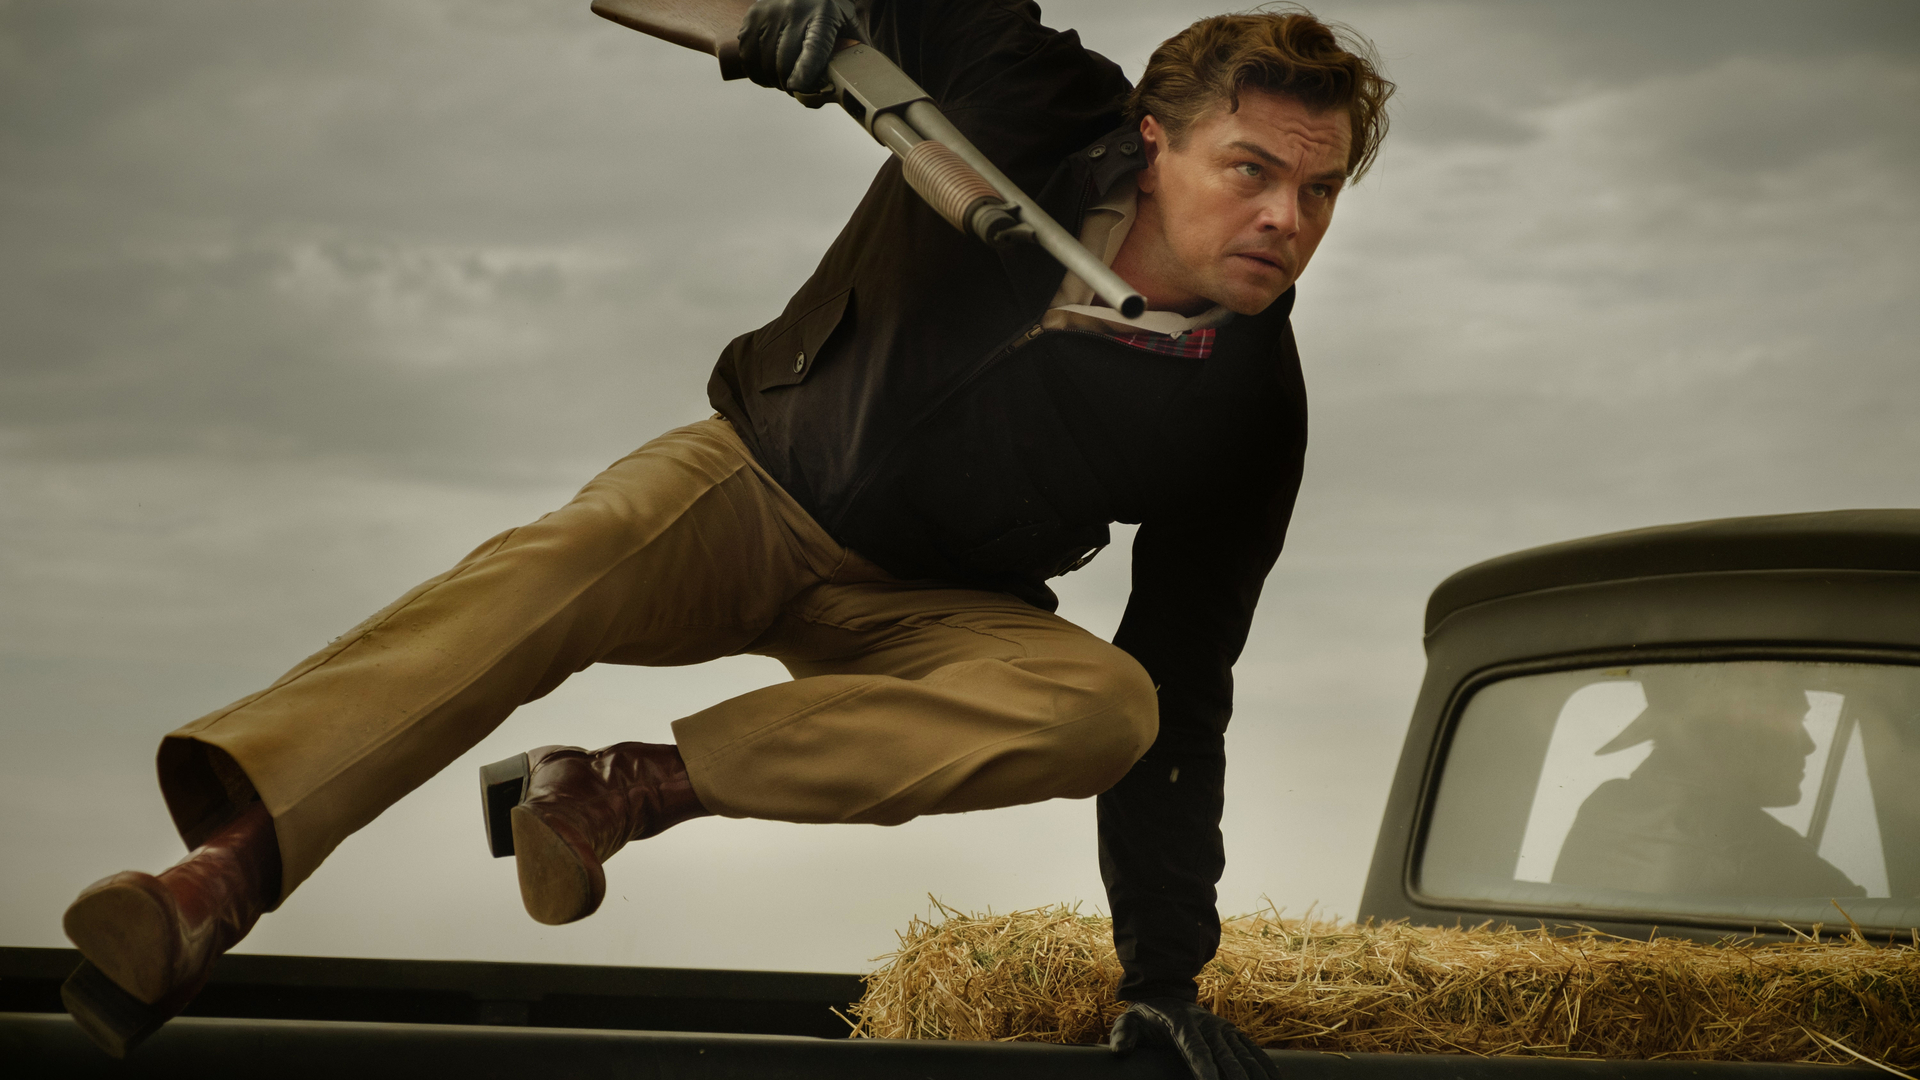 1920x1080 Leonardo DiCaprio In Once Upon A Time In Hollywood Laptop